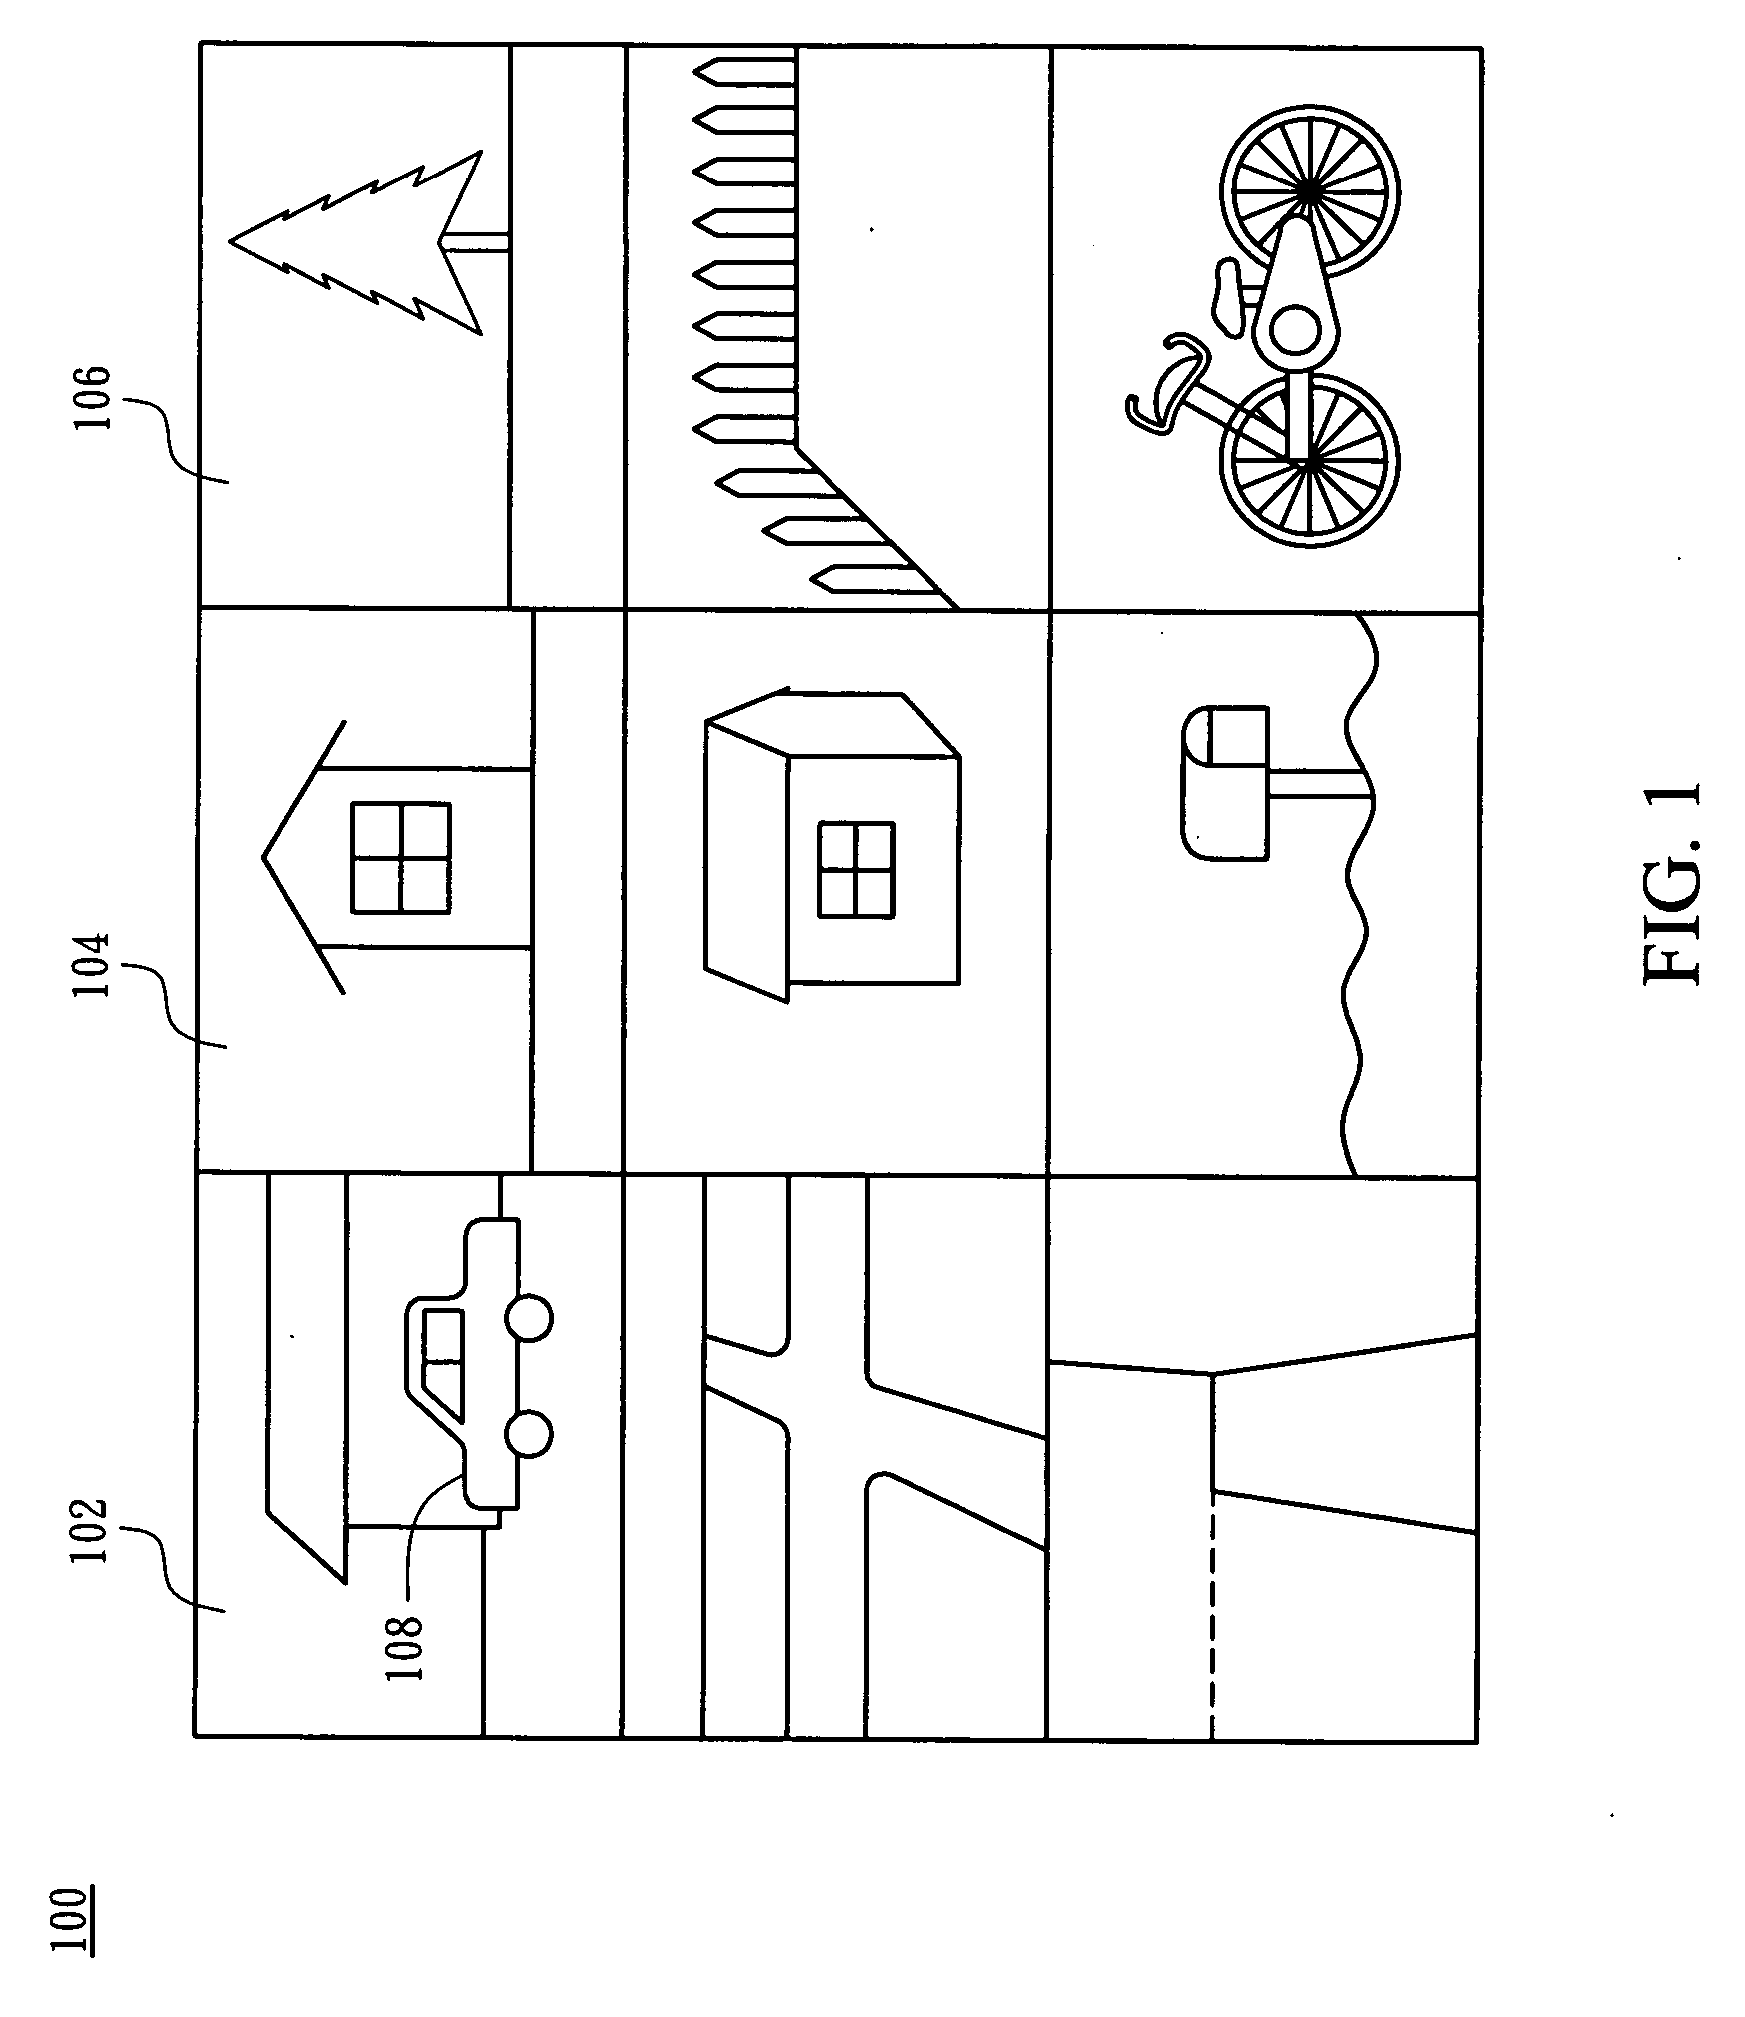 Method of searching for clip differences in recorded video data of a surveillance system